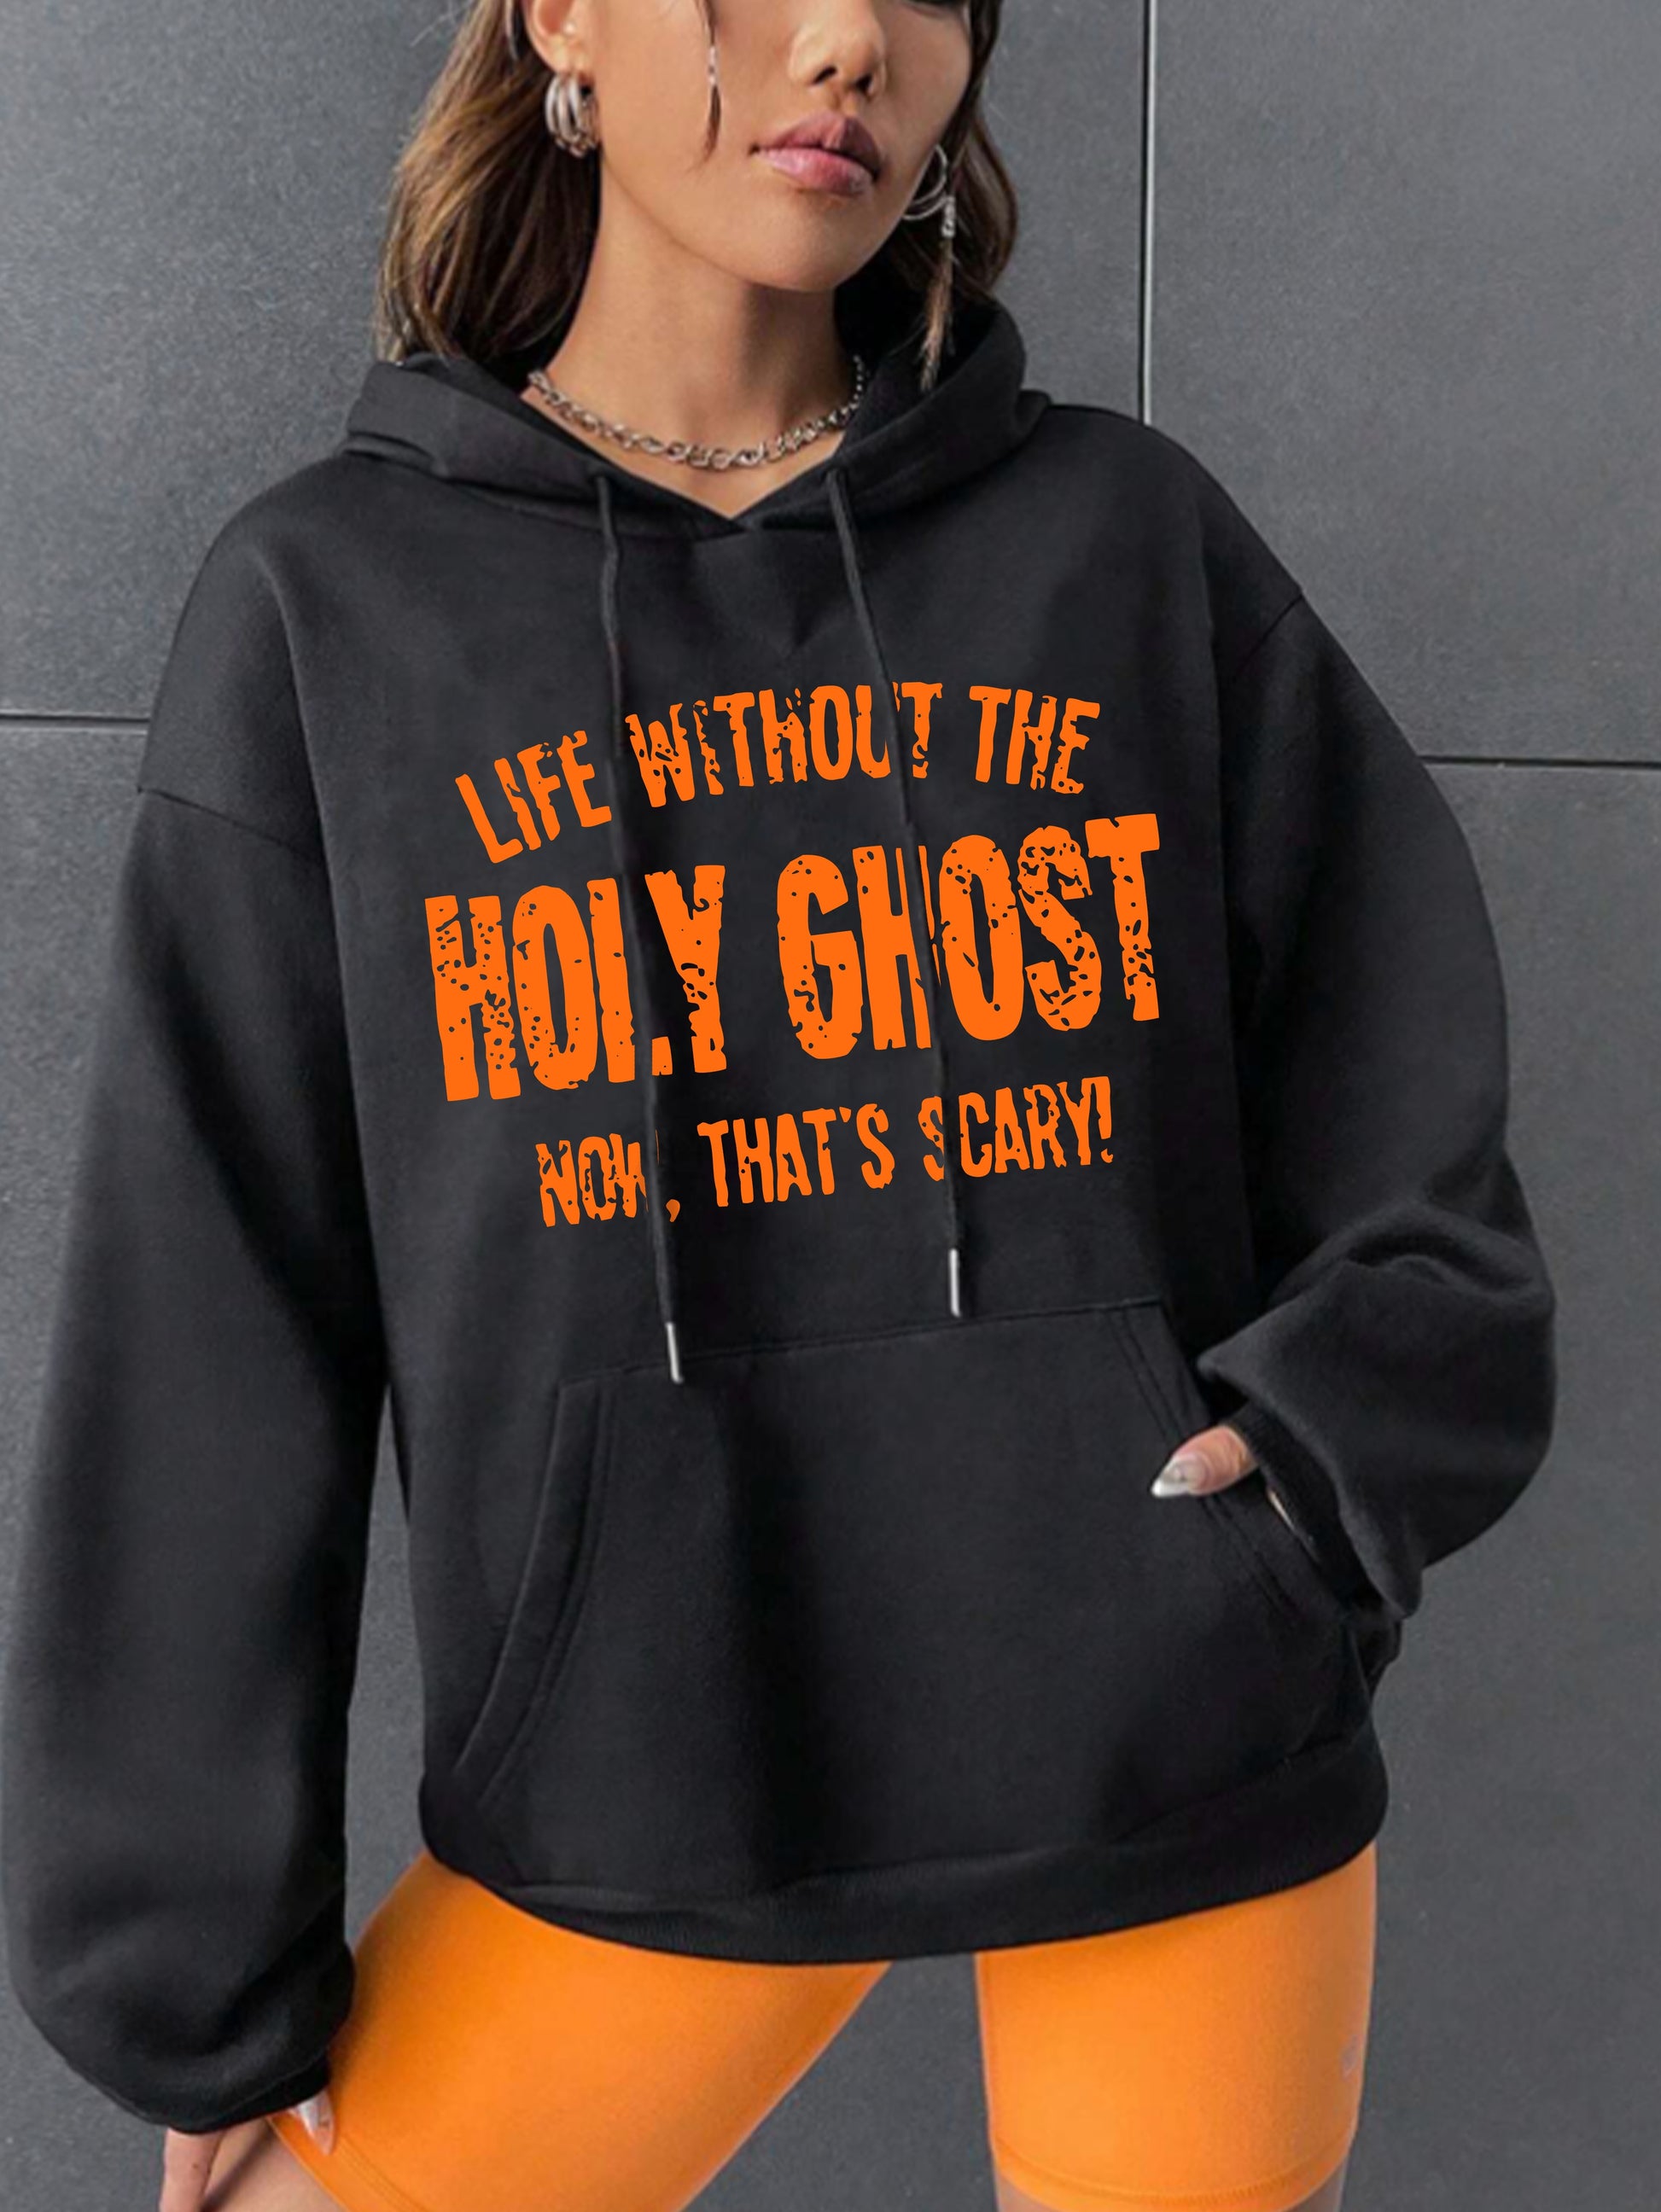 Life Without The Holy Ghost Now That's Scary Women's Christian Pullover Hooded Sweatshirt claimedbygoddesigns